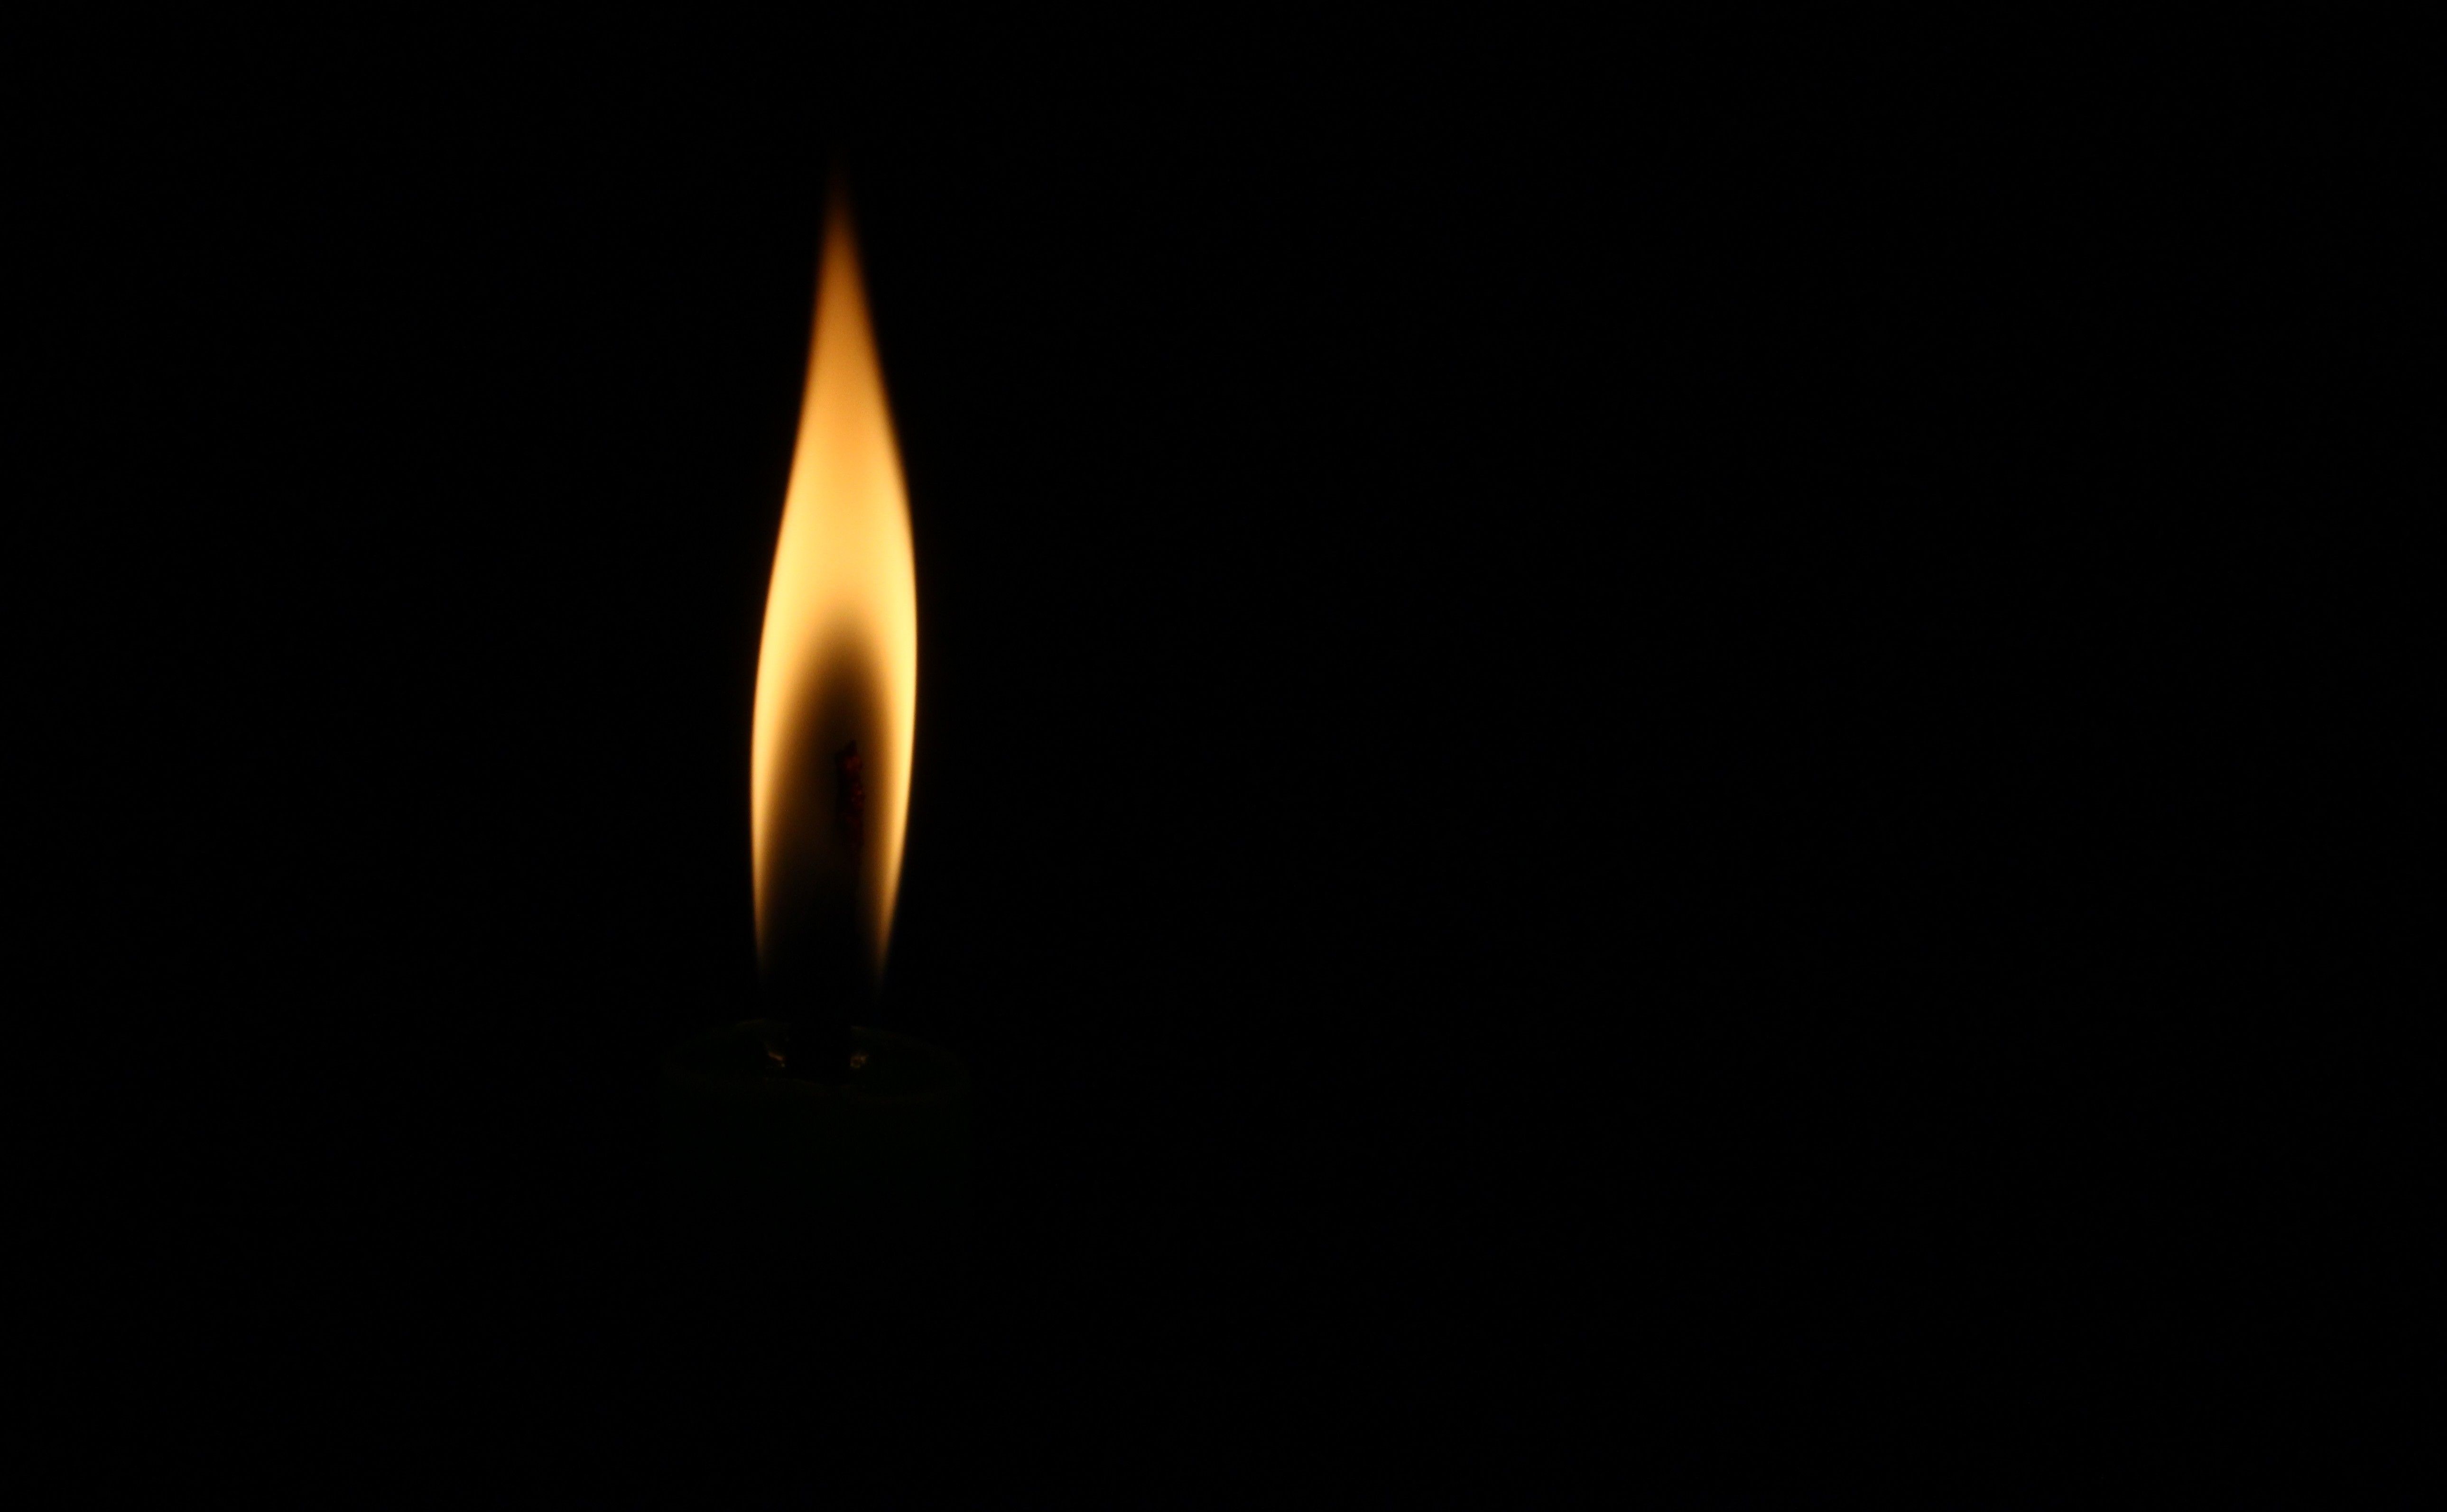 freemoviech.com. Candle in the dark, Dark wallpaper, Candle flames